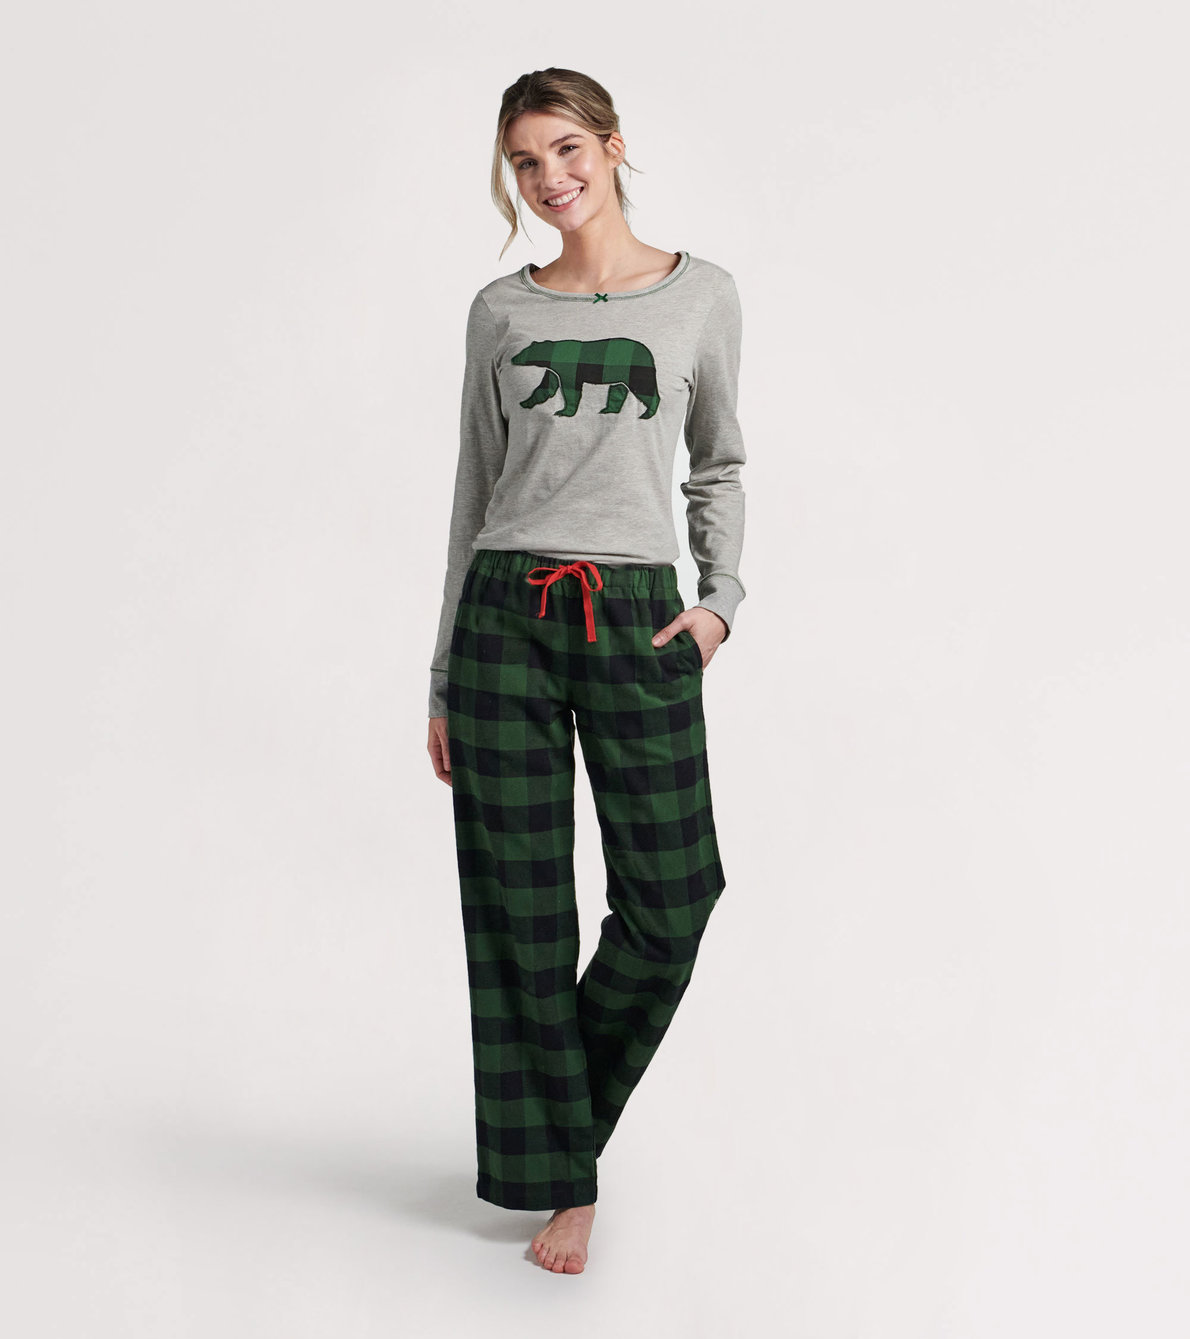 View larger image of Forest Green Plaid Women's Tee and Pants Pajama Separates